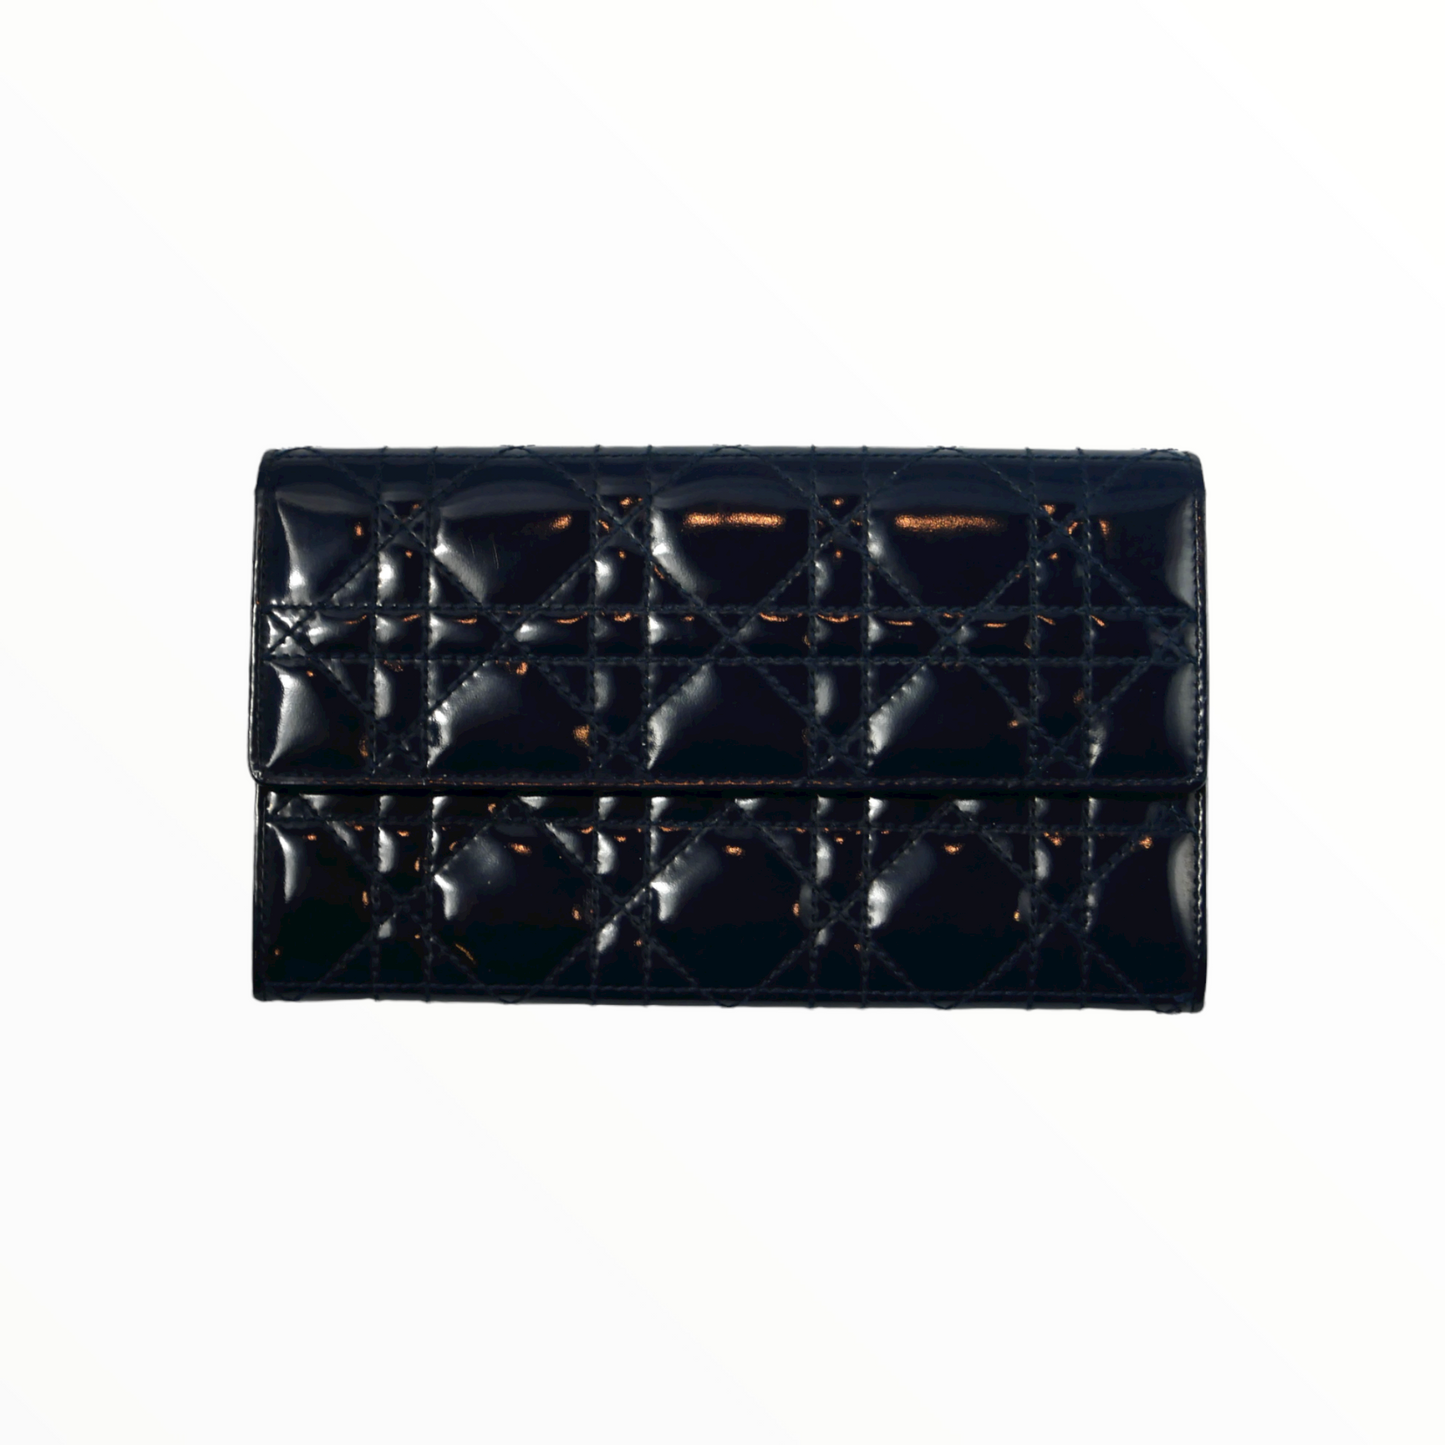 Christian Dior cannage navy blue wallet